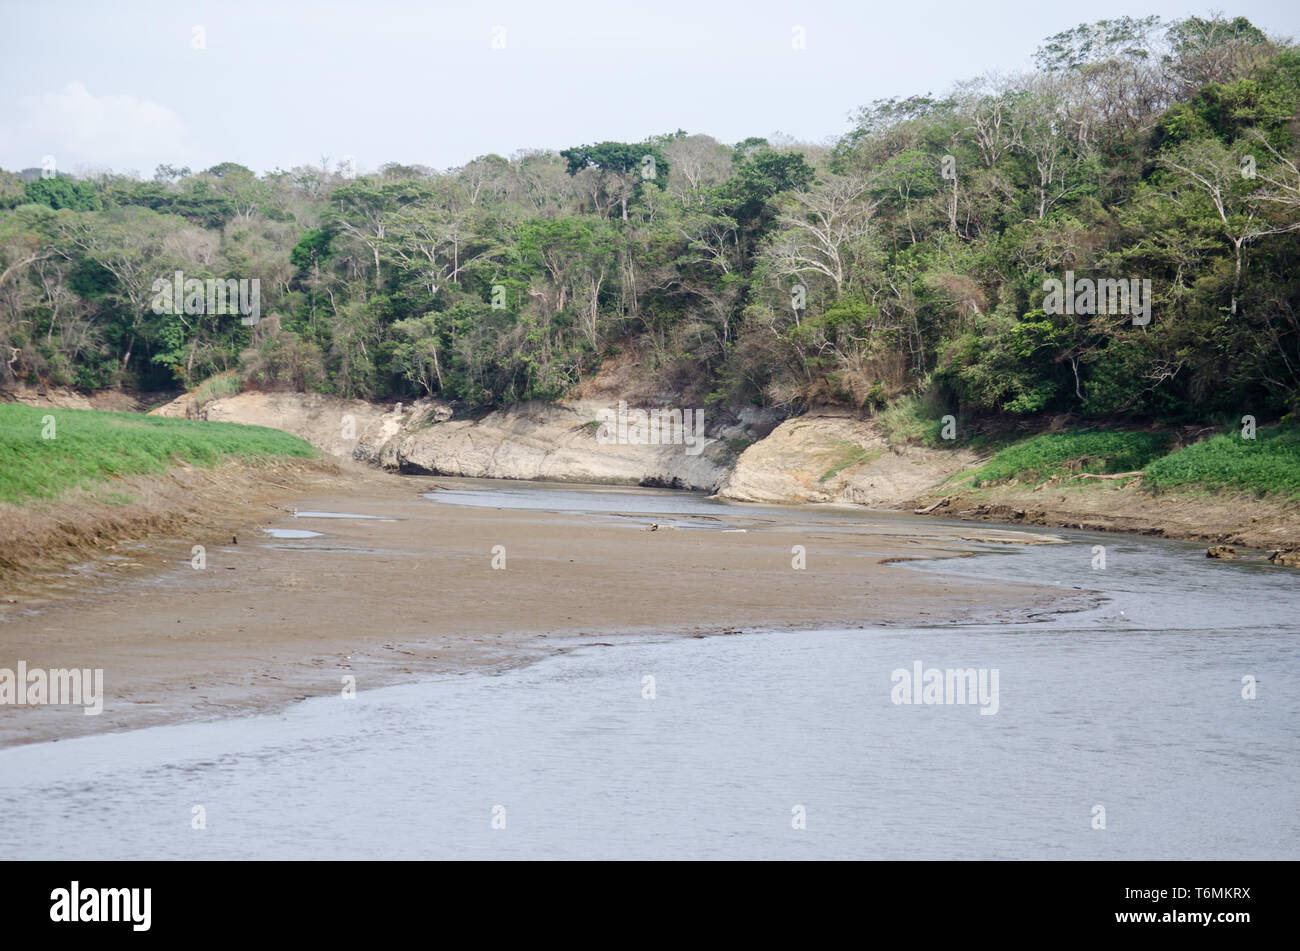 Chagres River landscape during dry season 2019.  A severe drought is affecting the river. Stock Photo